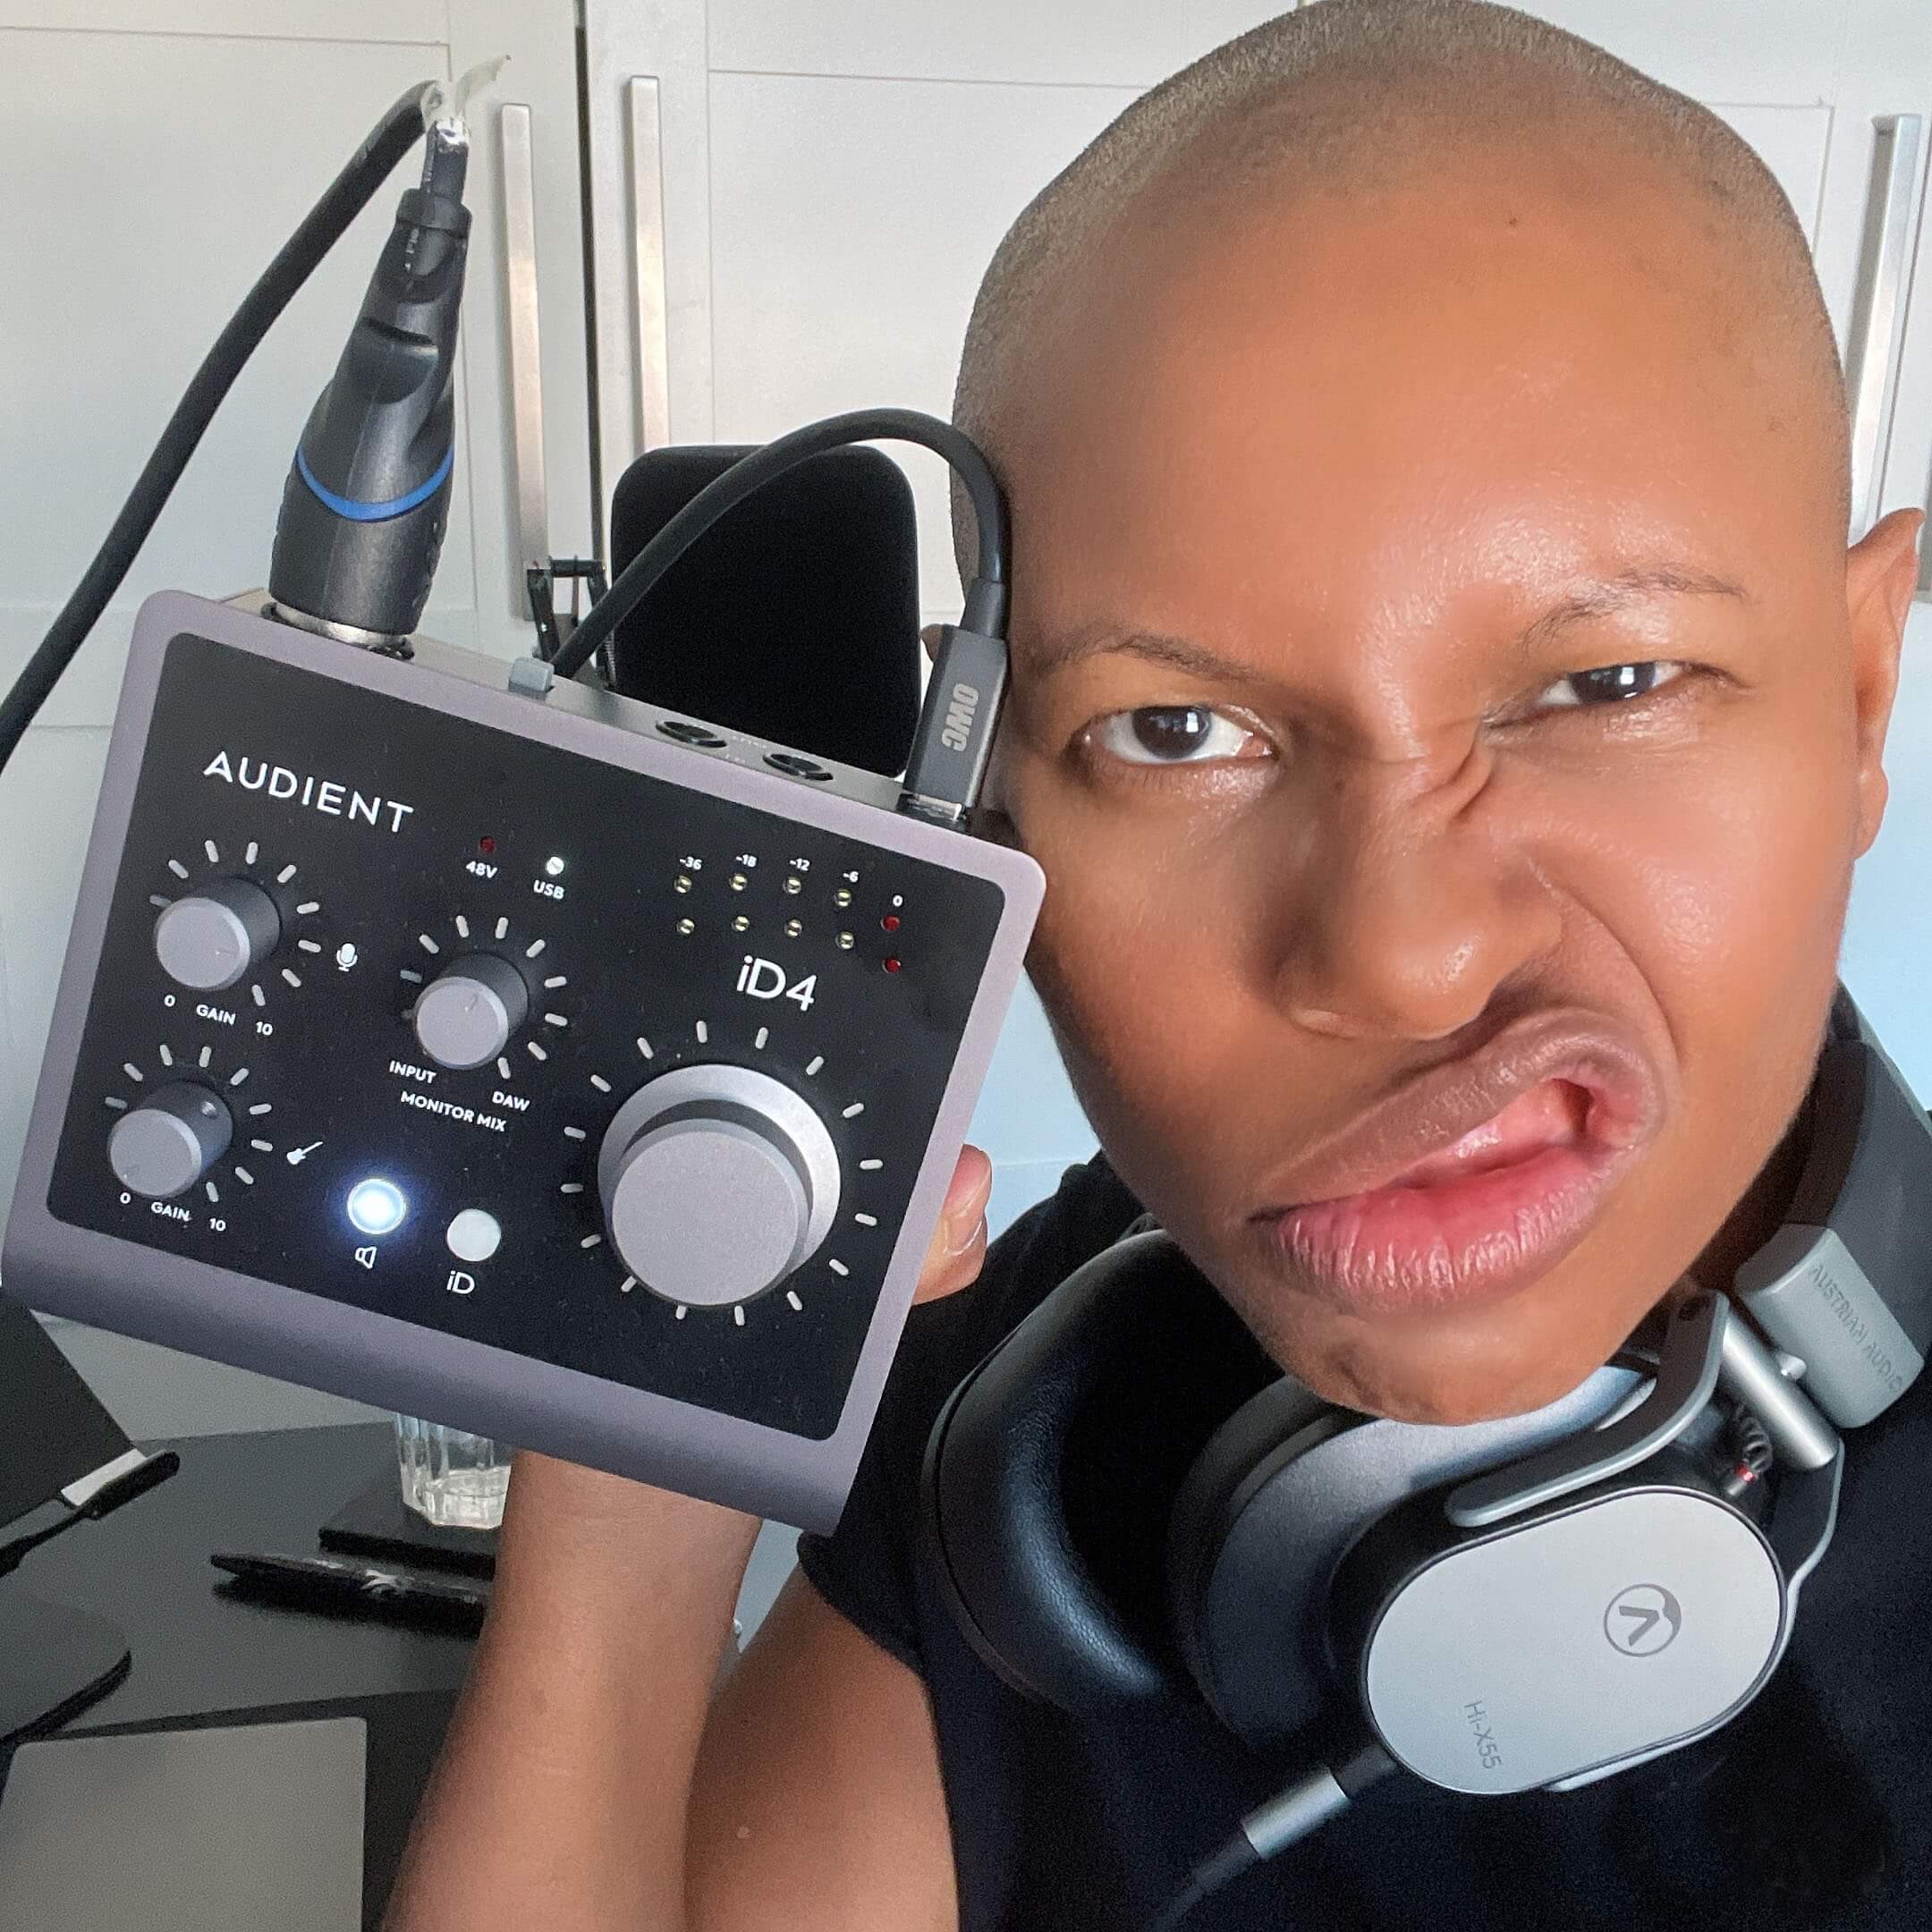 Skunk Anansie vocalist SKIN wearing headphones pulls a face with her iD4 audio interface